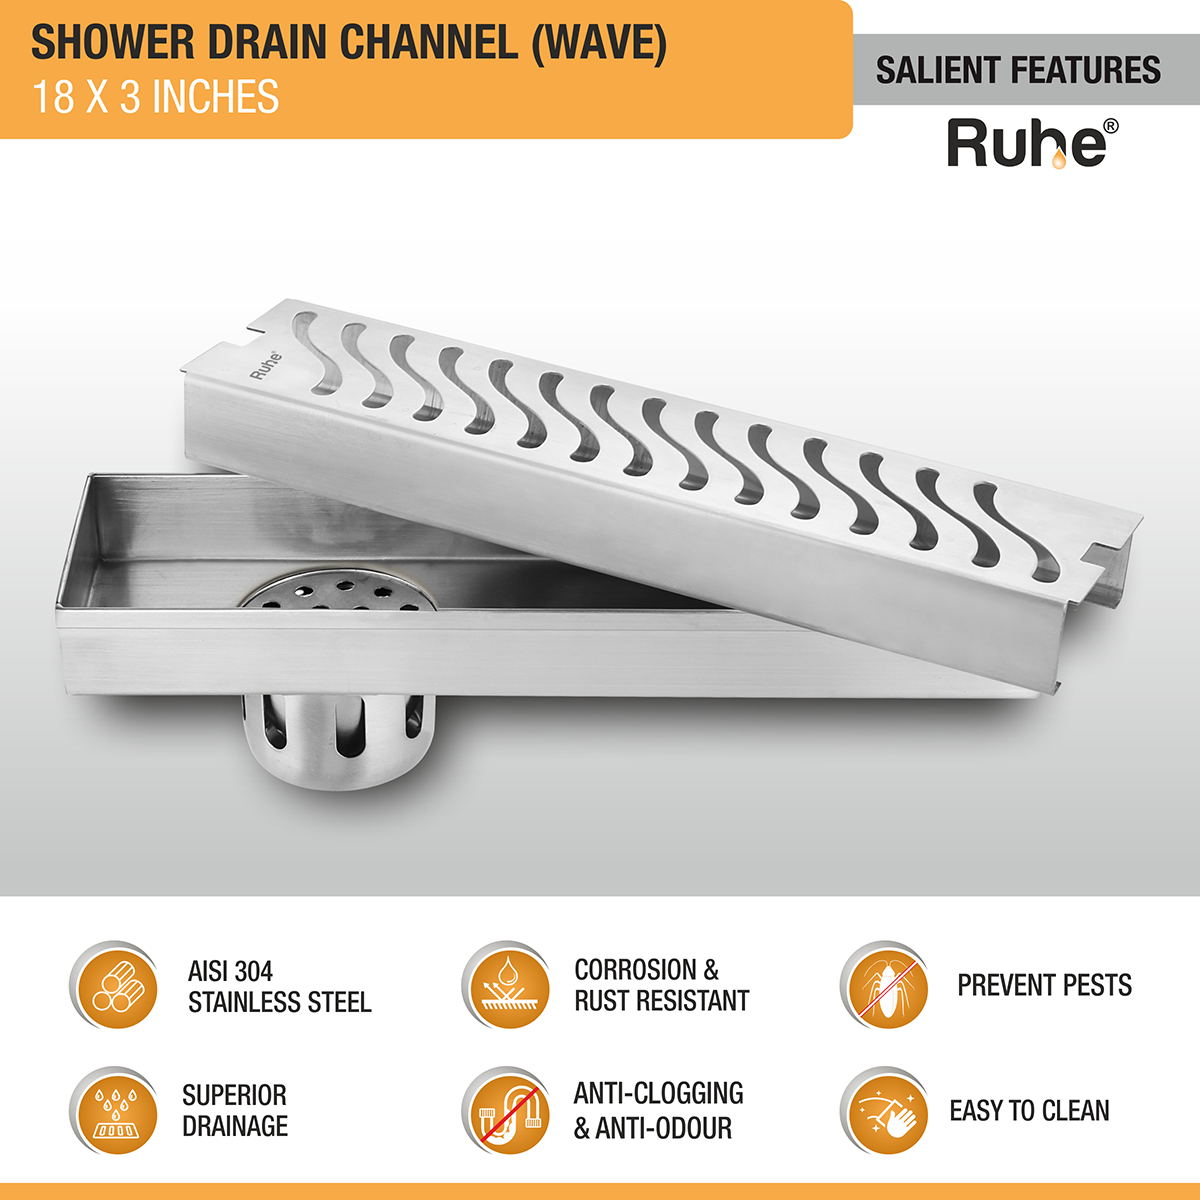 Wave Shower Drain Channel (18 X 3 Inches) with Cockroach Trap (304 Grade) features